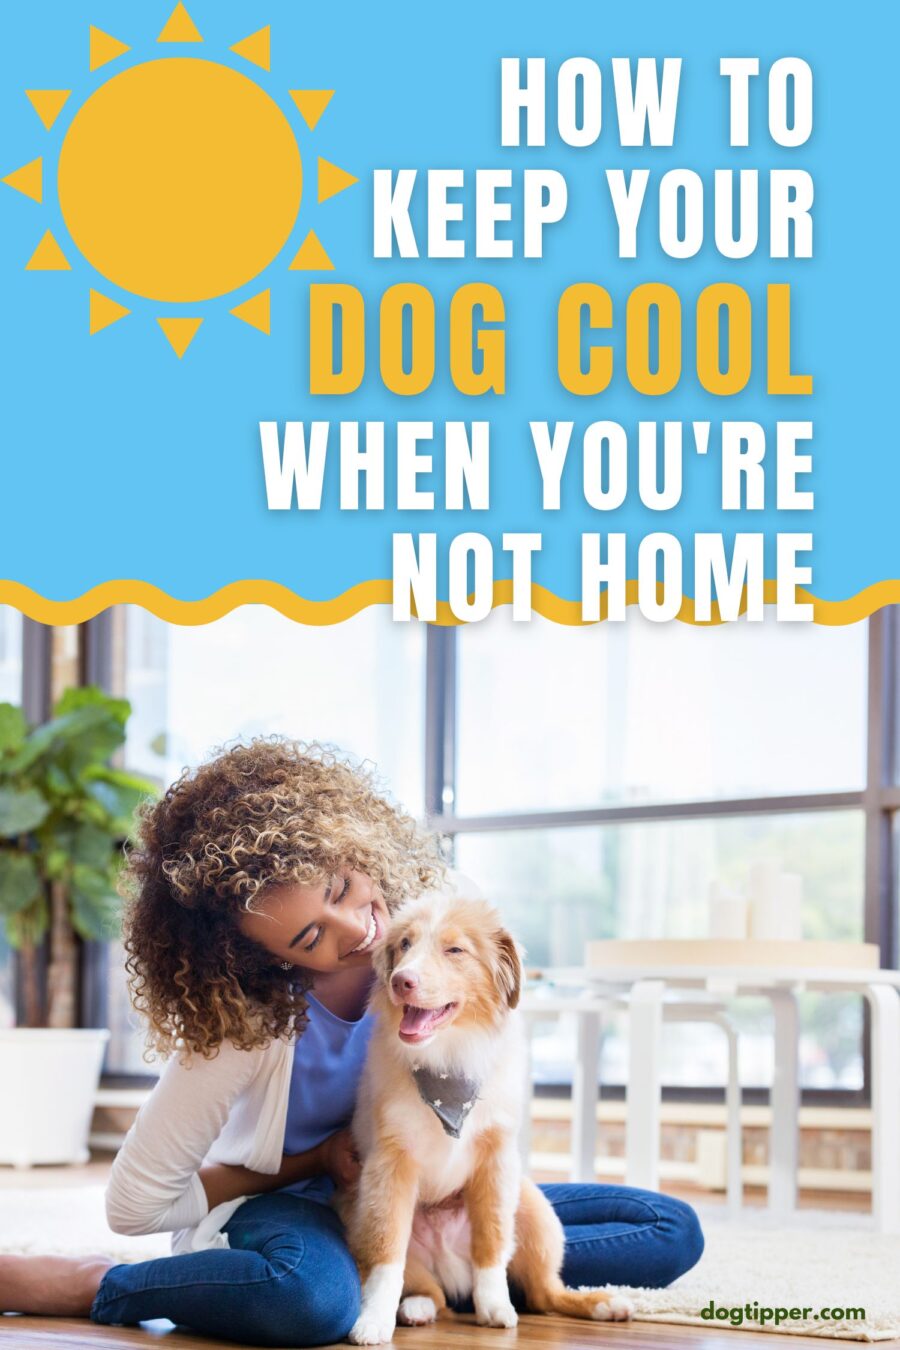 How to Keep Your Dog Cool When You're Not Home